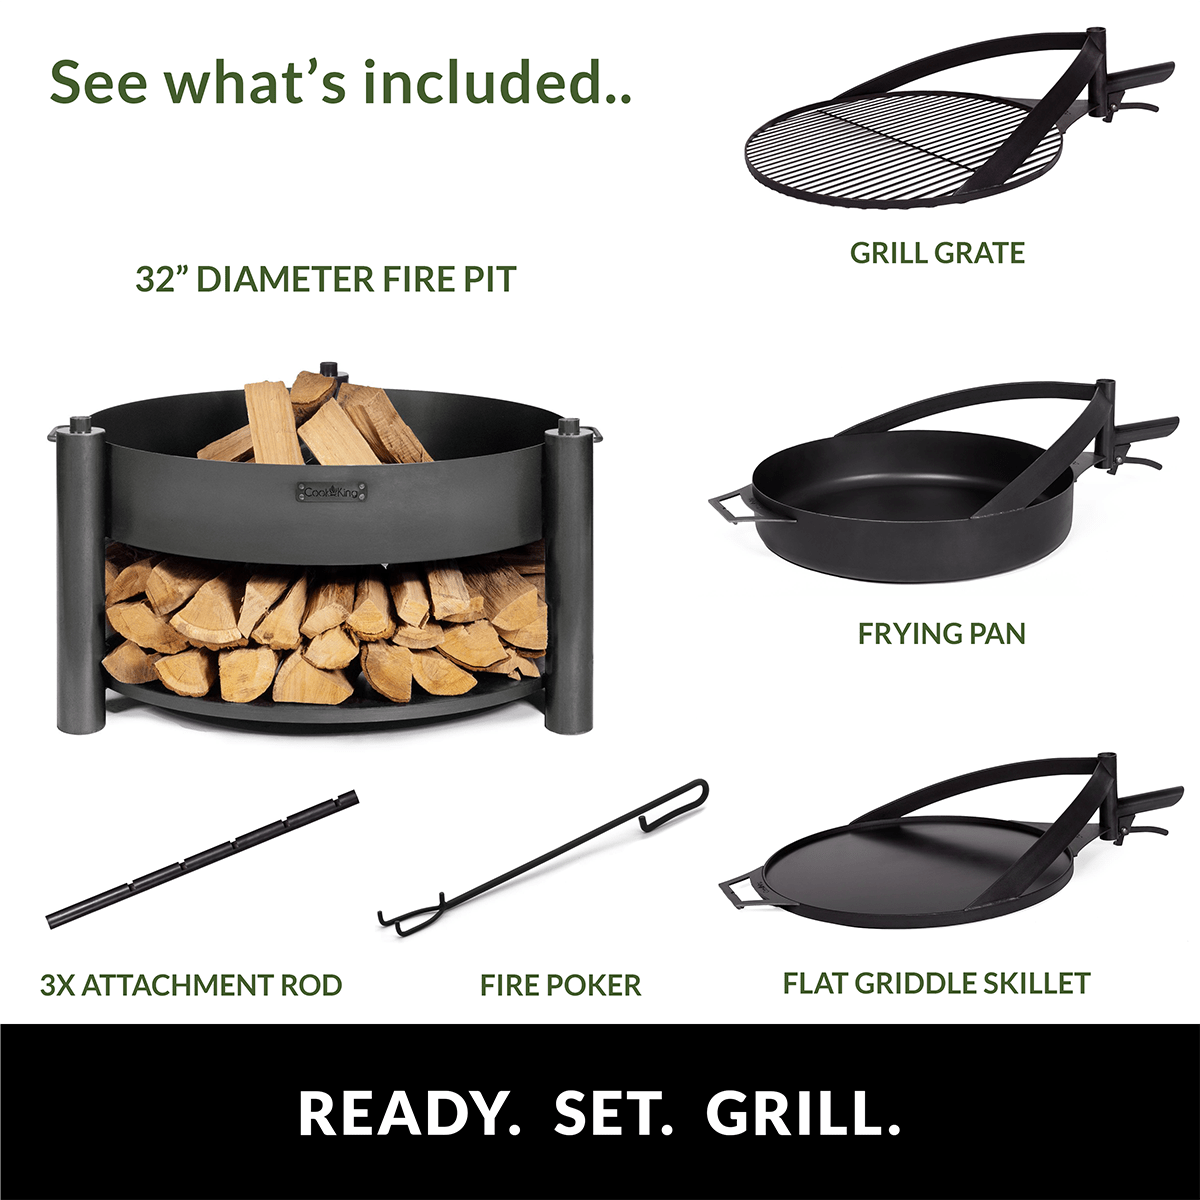 Grand Hearth 32" Deluxe 3-in-1 Fire Pit - Good Directions